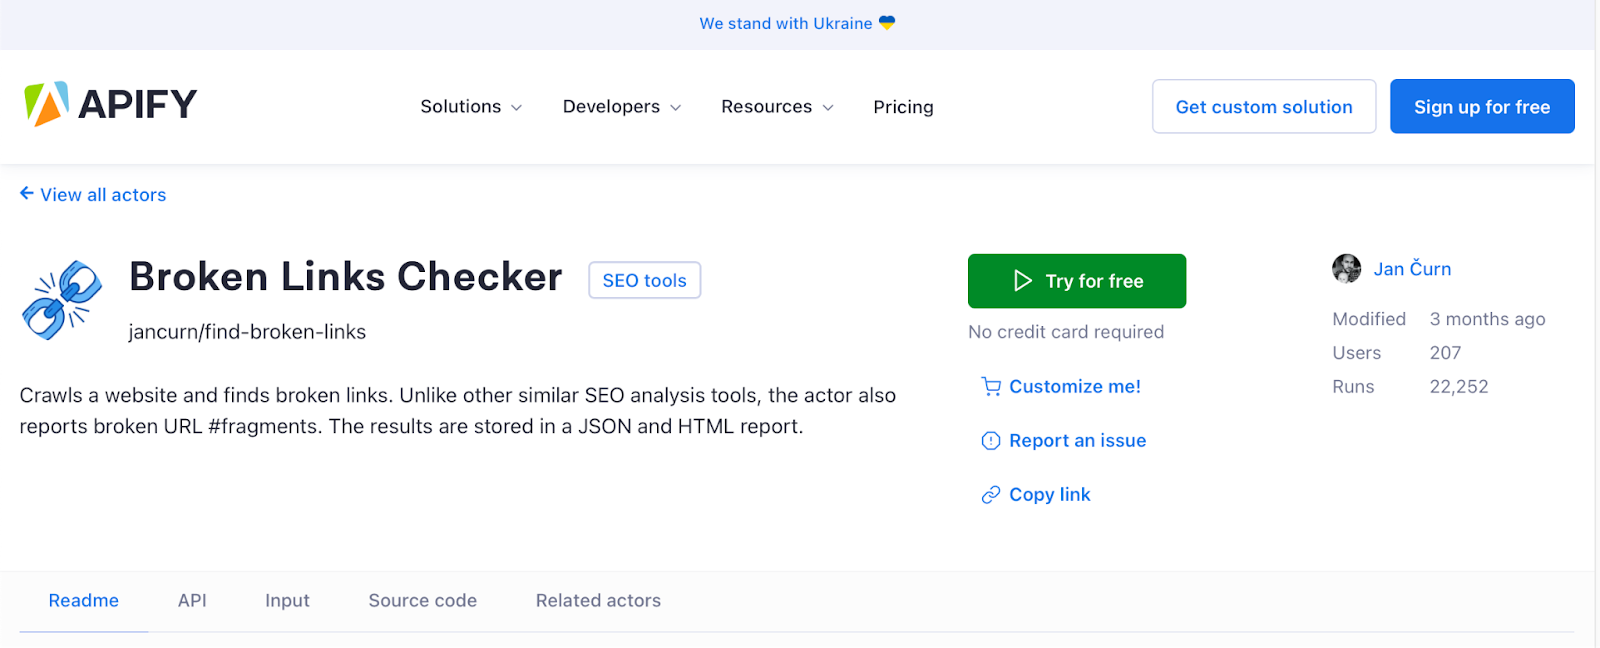 The Broken Links Checker page on Apify Store